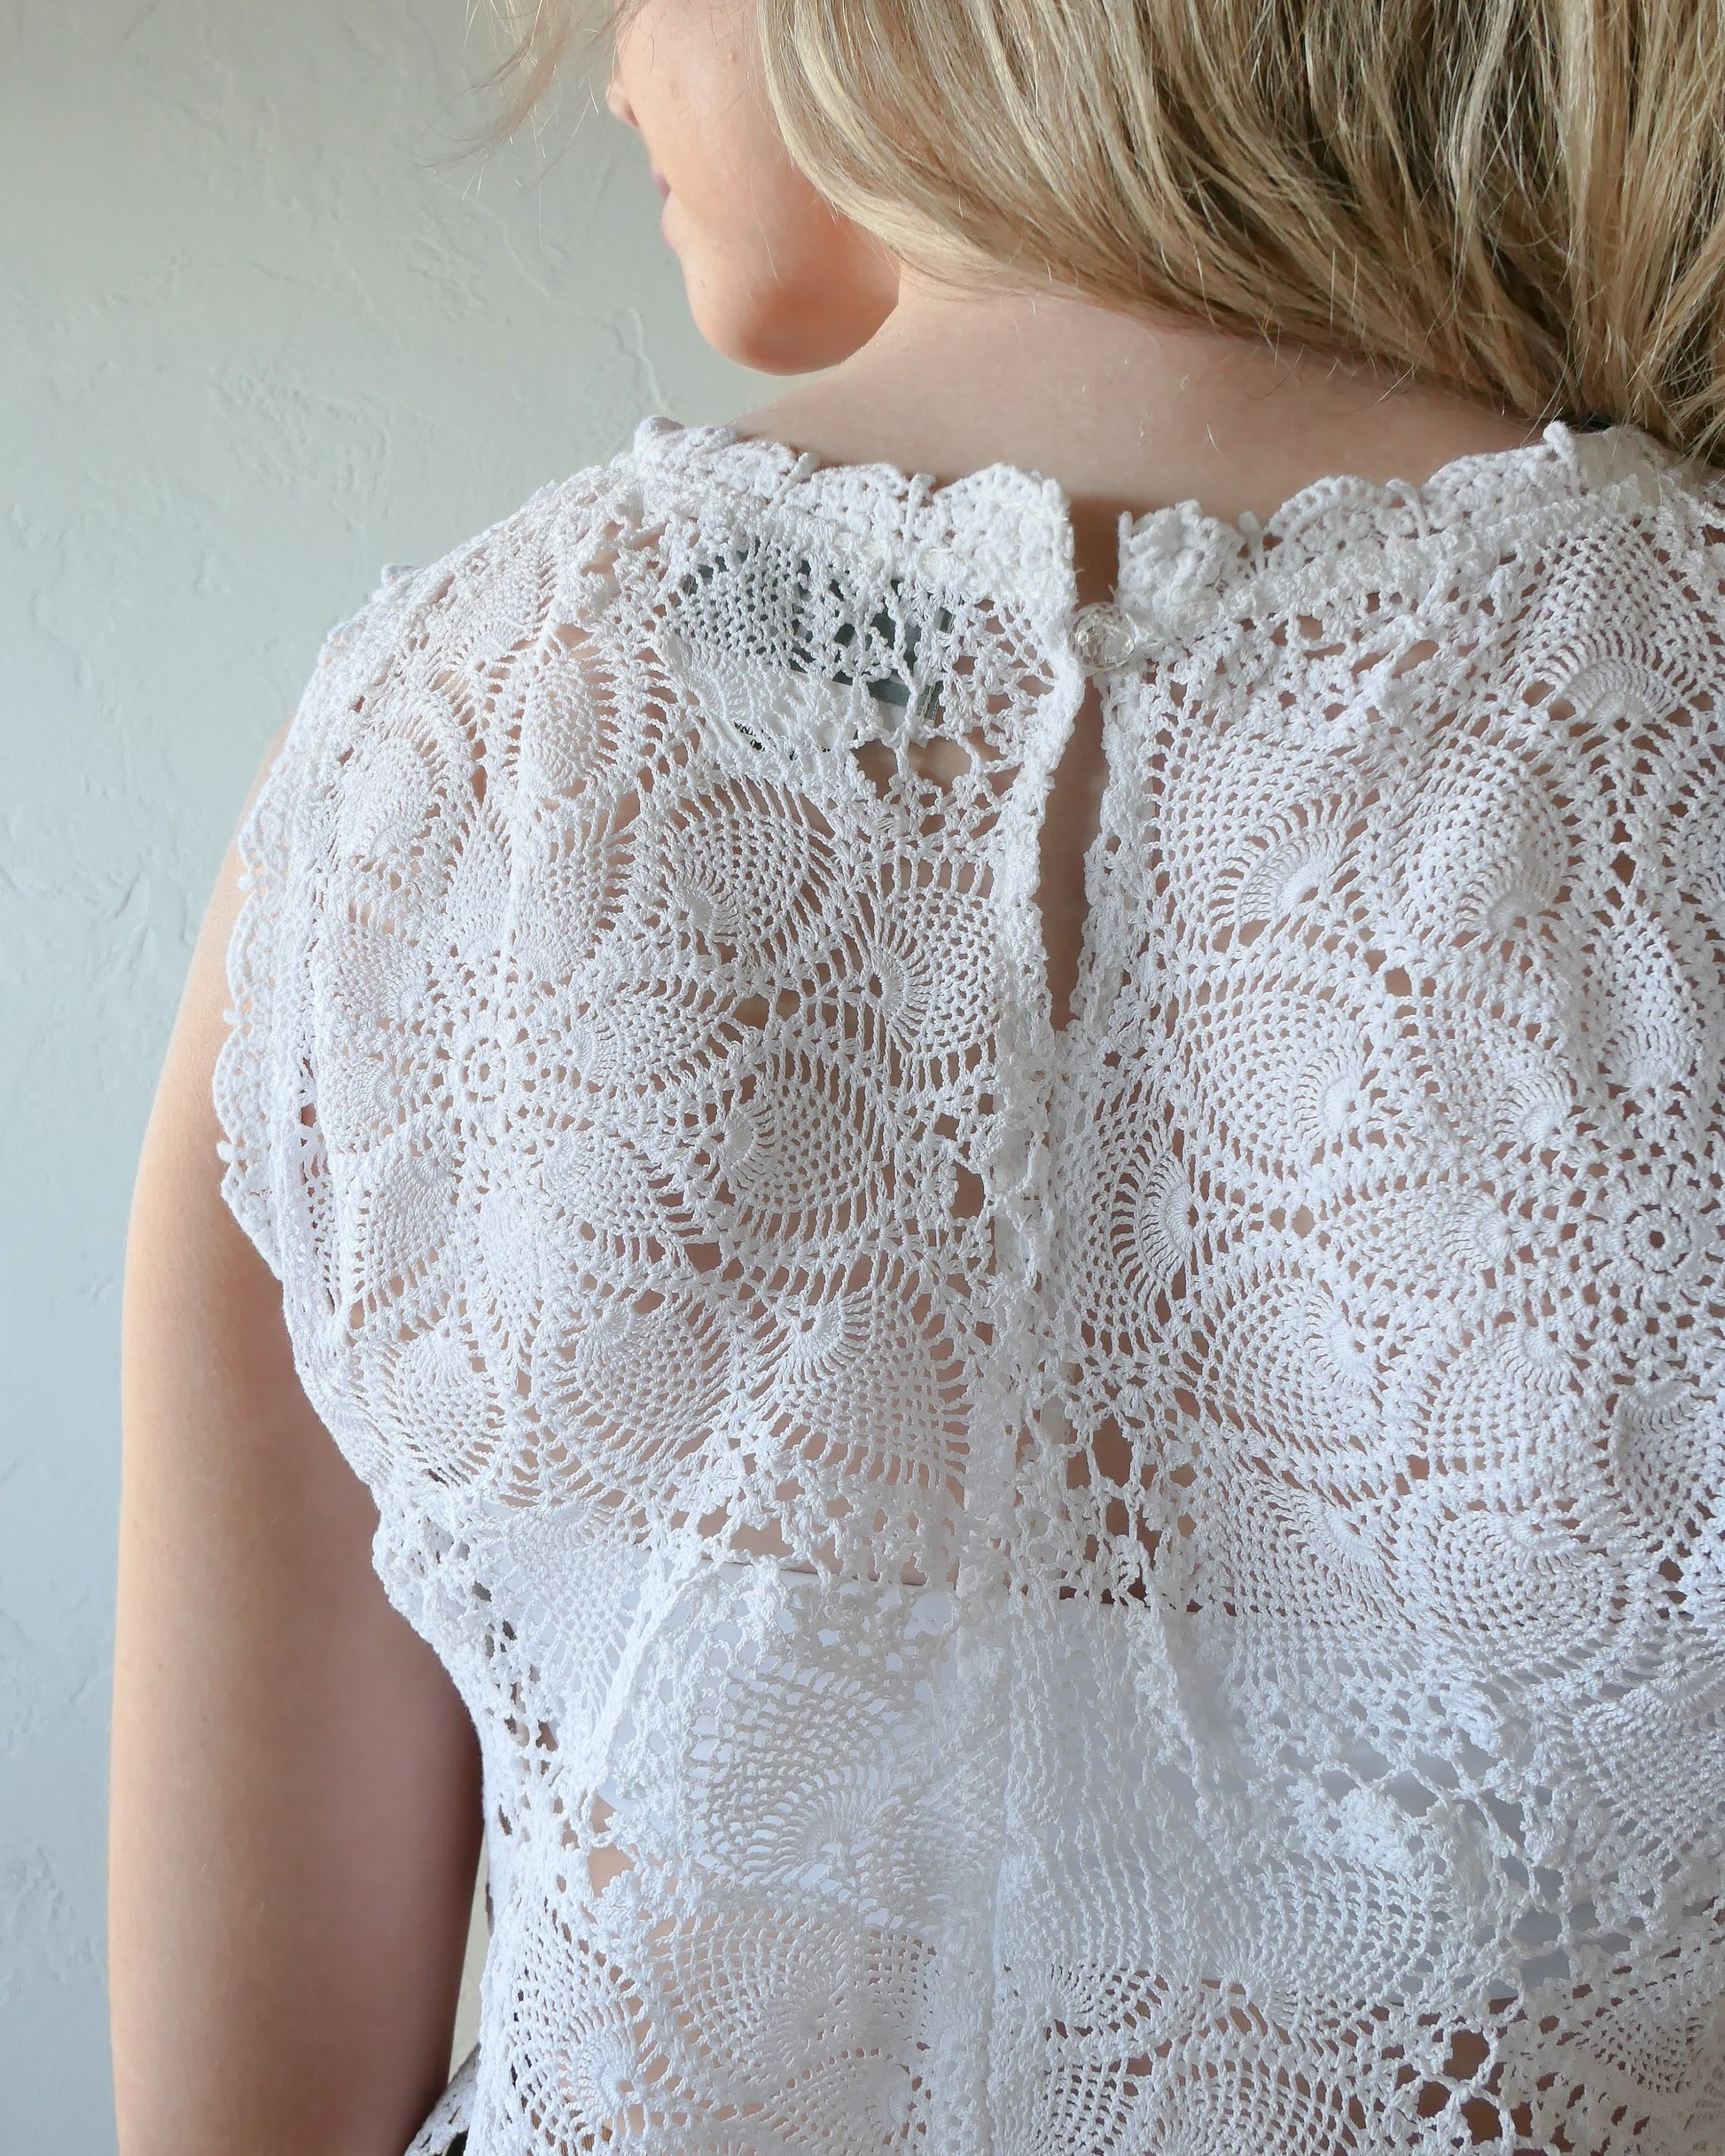 Closeup of back view of white top. An ultra casual, hip, and boho-chic crop tank top made with interconnected flower doilies reminiscent of the white lotus, which symbolizes peace, tranquility, and calmness. Lace trim at the collar and sleeve. Model is wearing a white colored crochet Lim's Vintage top.